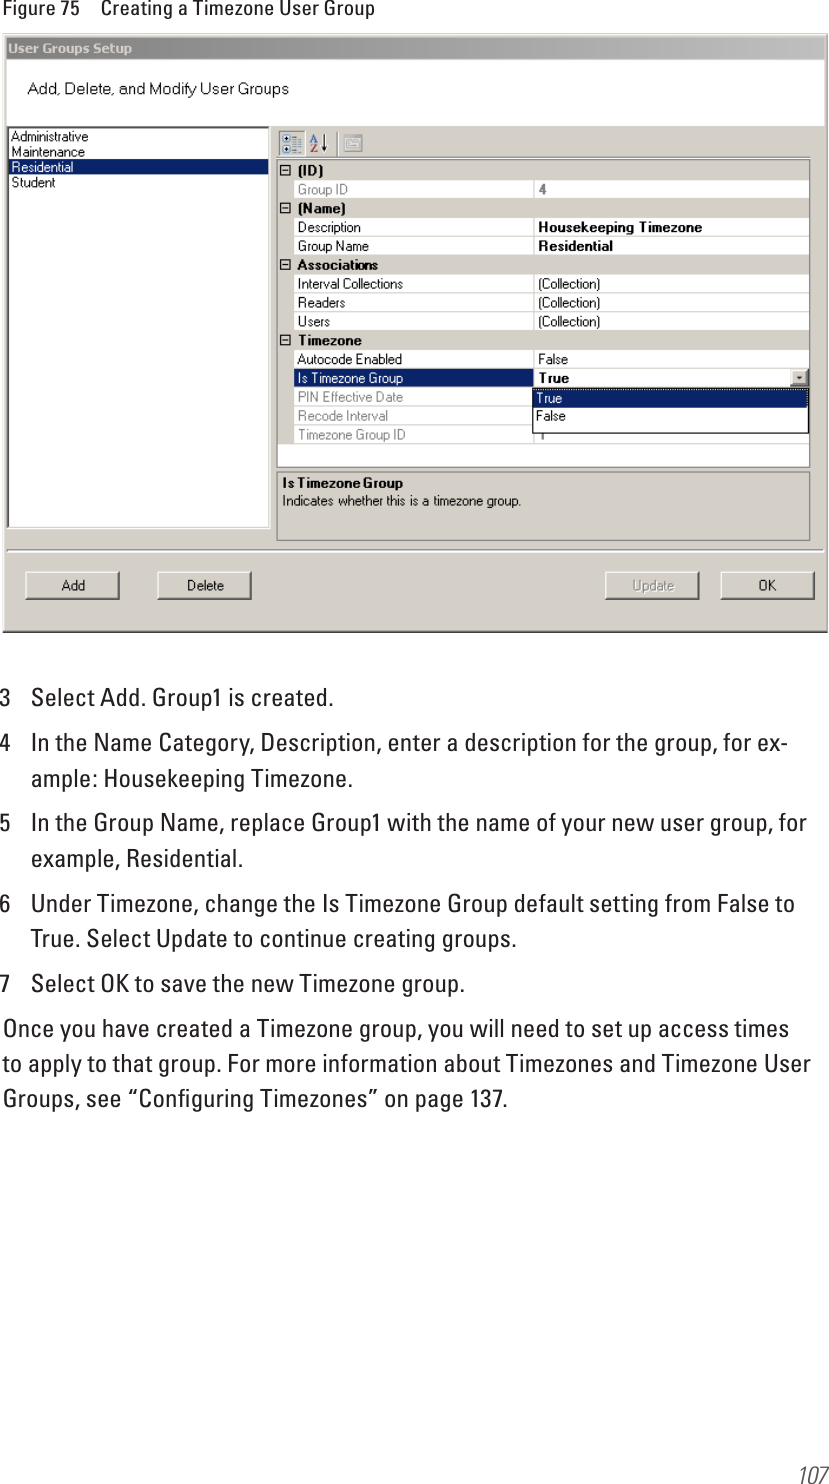 107Figure 75  Creating a Timezone User Group3  Select Add. Group1 is created. 4  In the Name Category, Description, enter a description for the group, for ex-ample: Housekeeping Timezone.5  In the Group Name, replace Group1 with the name of your new user group, for example, Residential.6  Under Timezone, change the Is Timezone Group default setting from False to True. Select Update to continue creating groups.7  Select OK to save the new Timezone group. Once you have created a Timezone group, you will need to set up access times to apply to that group. For more information about Timezones and Timezone User Groups, see “Conﬁguring Timezones” on page 137.